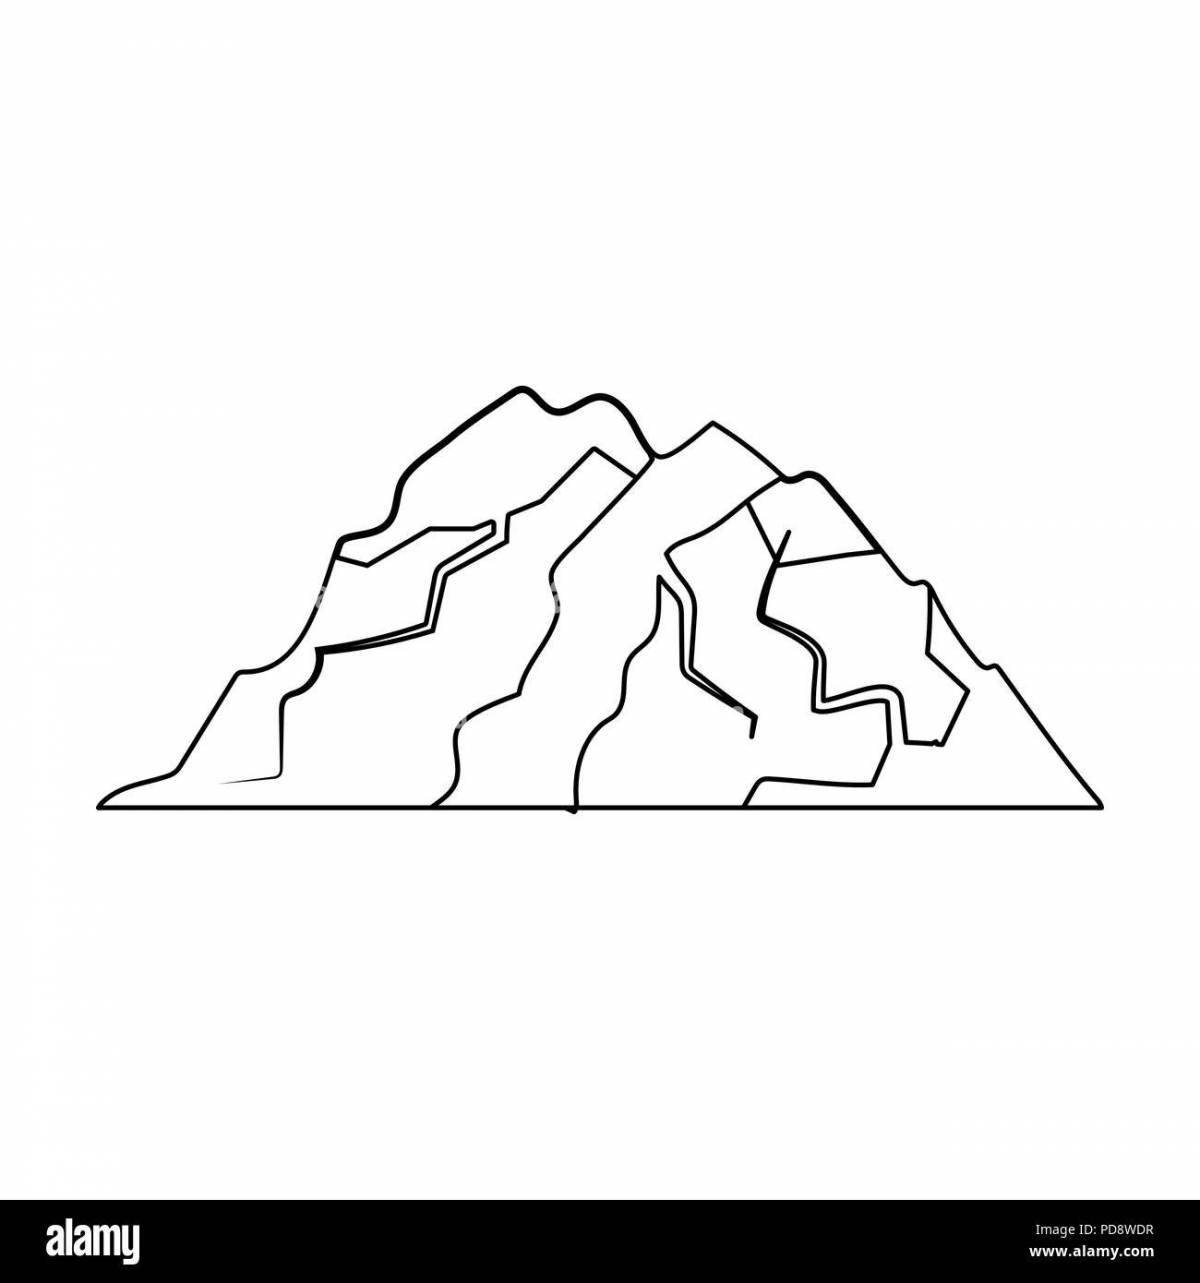 Majestic ice floe coloring page